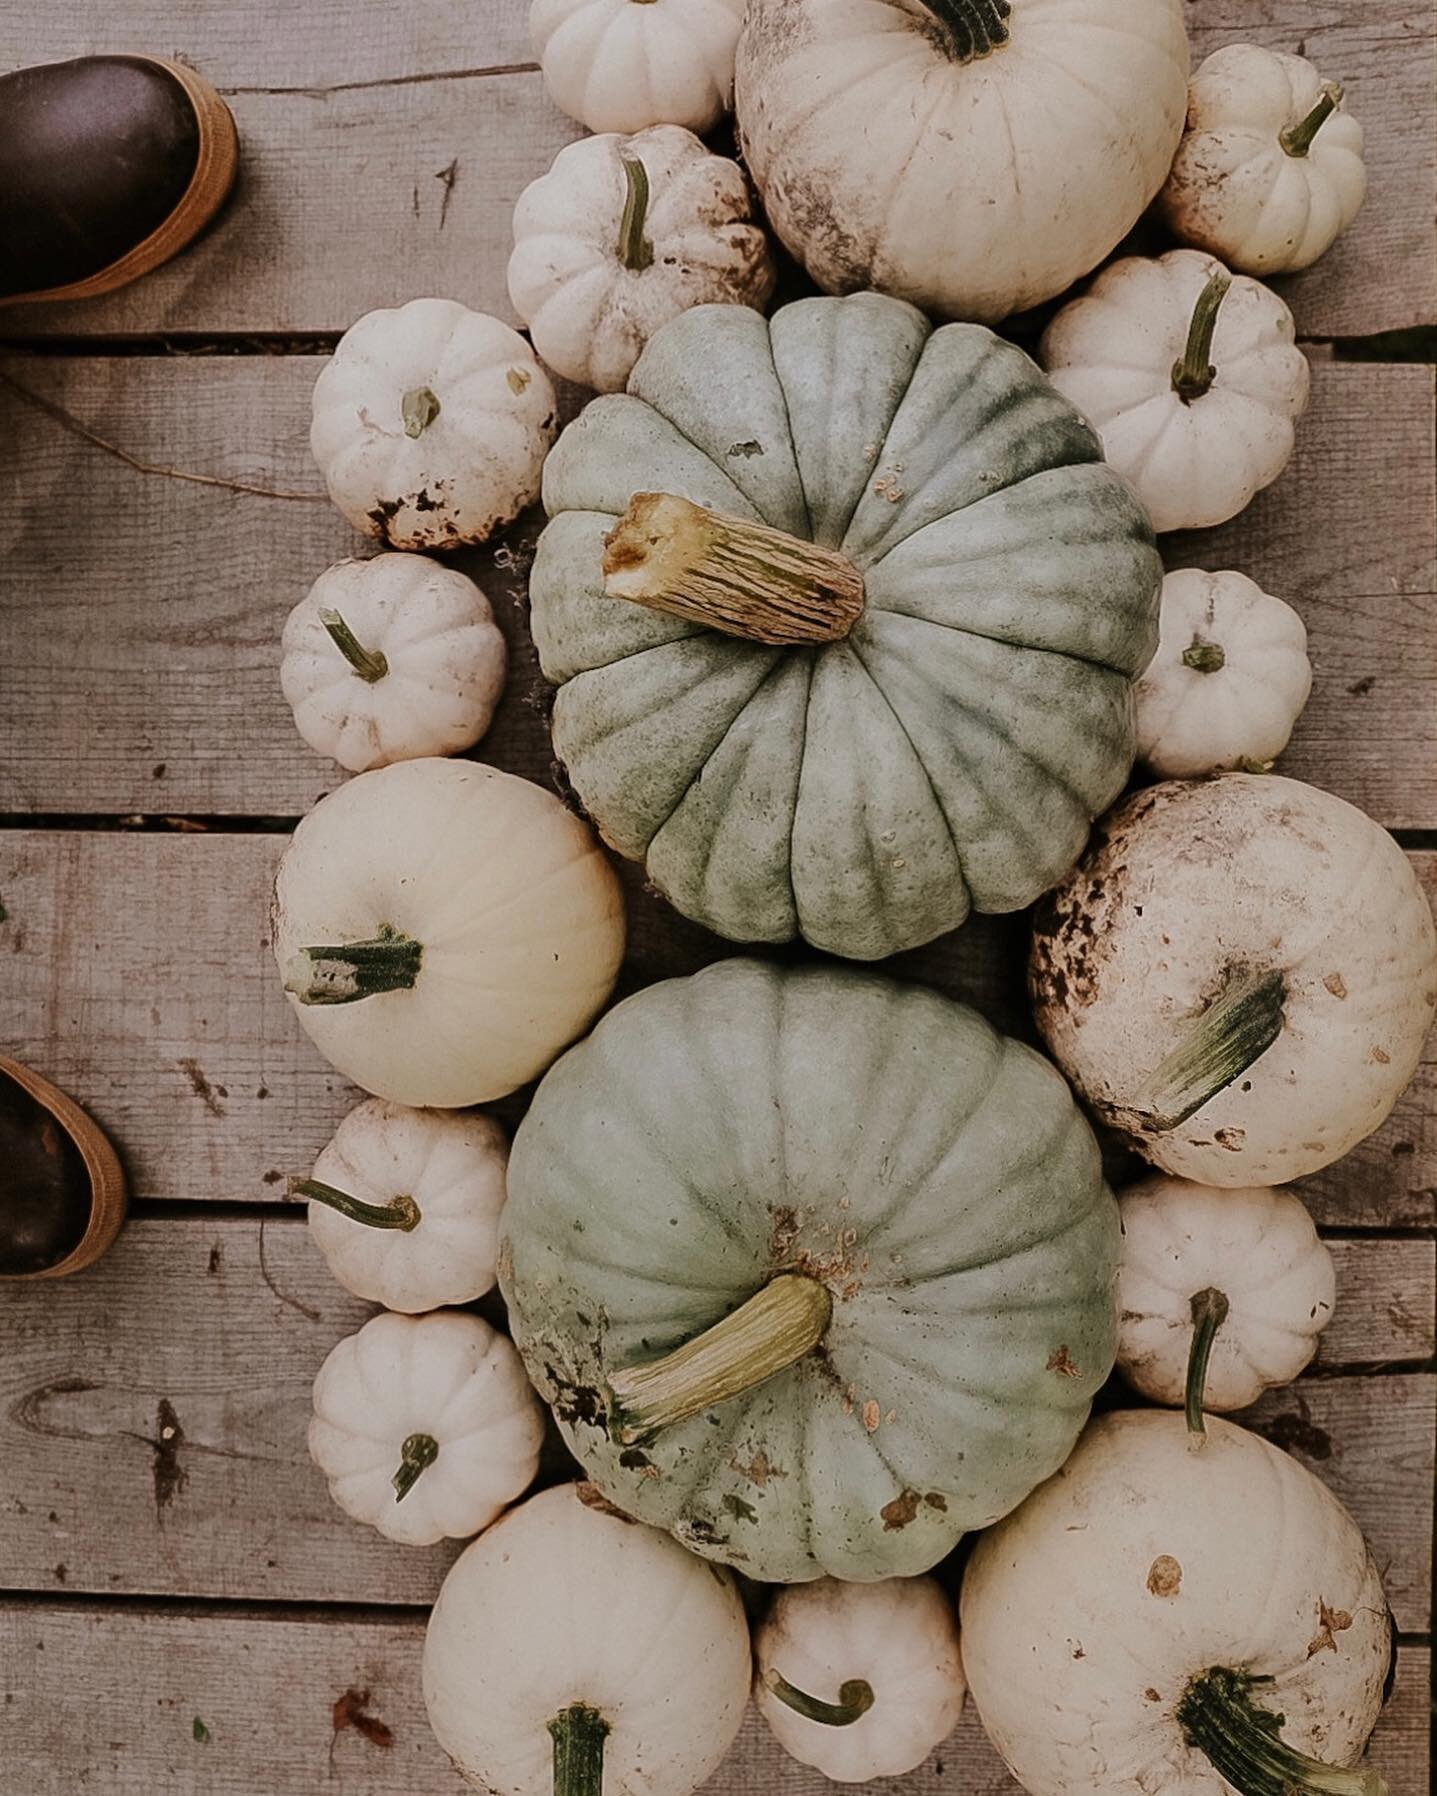 + Pumpkin 🎃 Farming +
+
+
We set out to grow a variety of heirloom pumpkins this year because last year I wanted some white and green ones.
+
+
We made a special patch, threw some seeds in and left them for most of the summer.
+
+
We had 2 jarrahdal